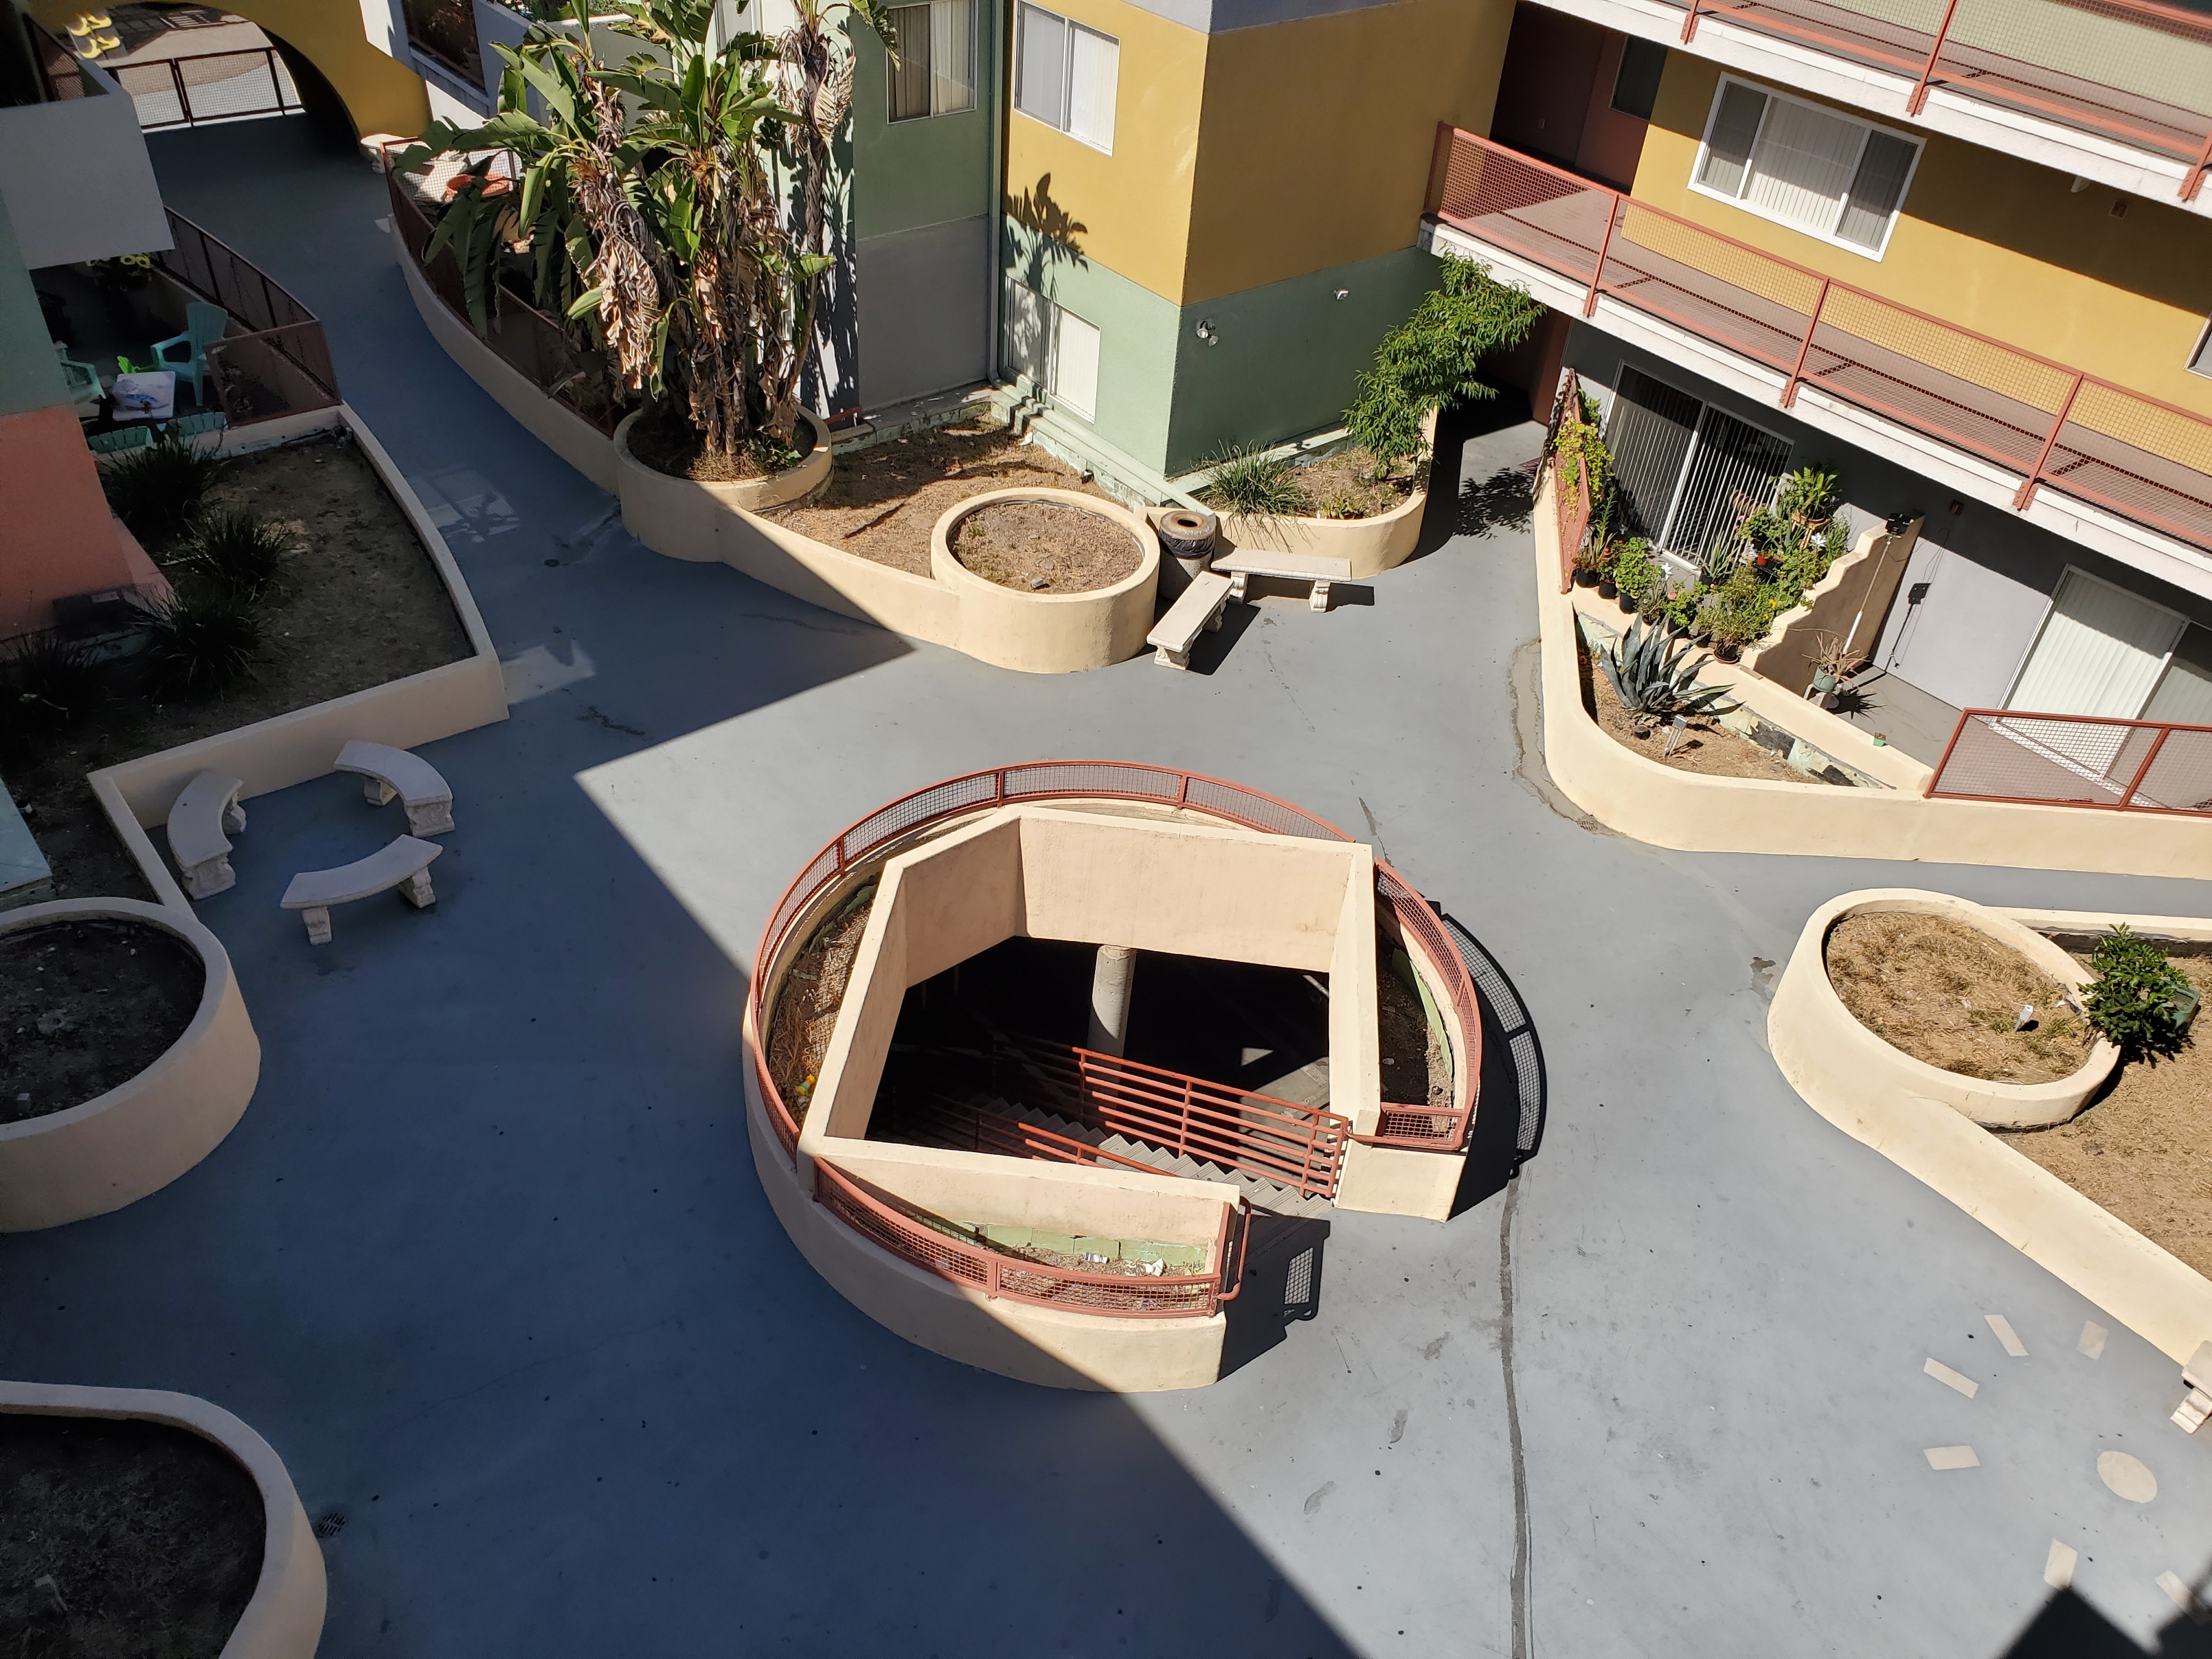 View of a patio, courtyard style, concrete benches, a round spiral stairs in the middle with handrails, plants around.